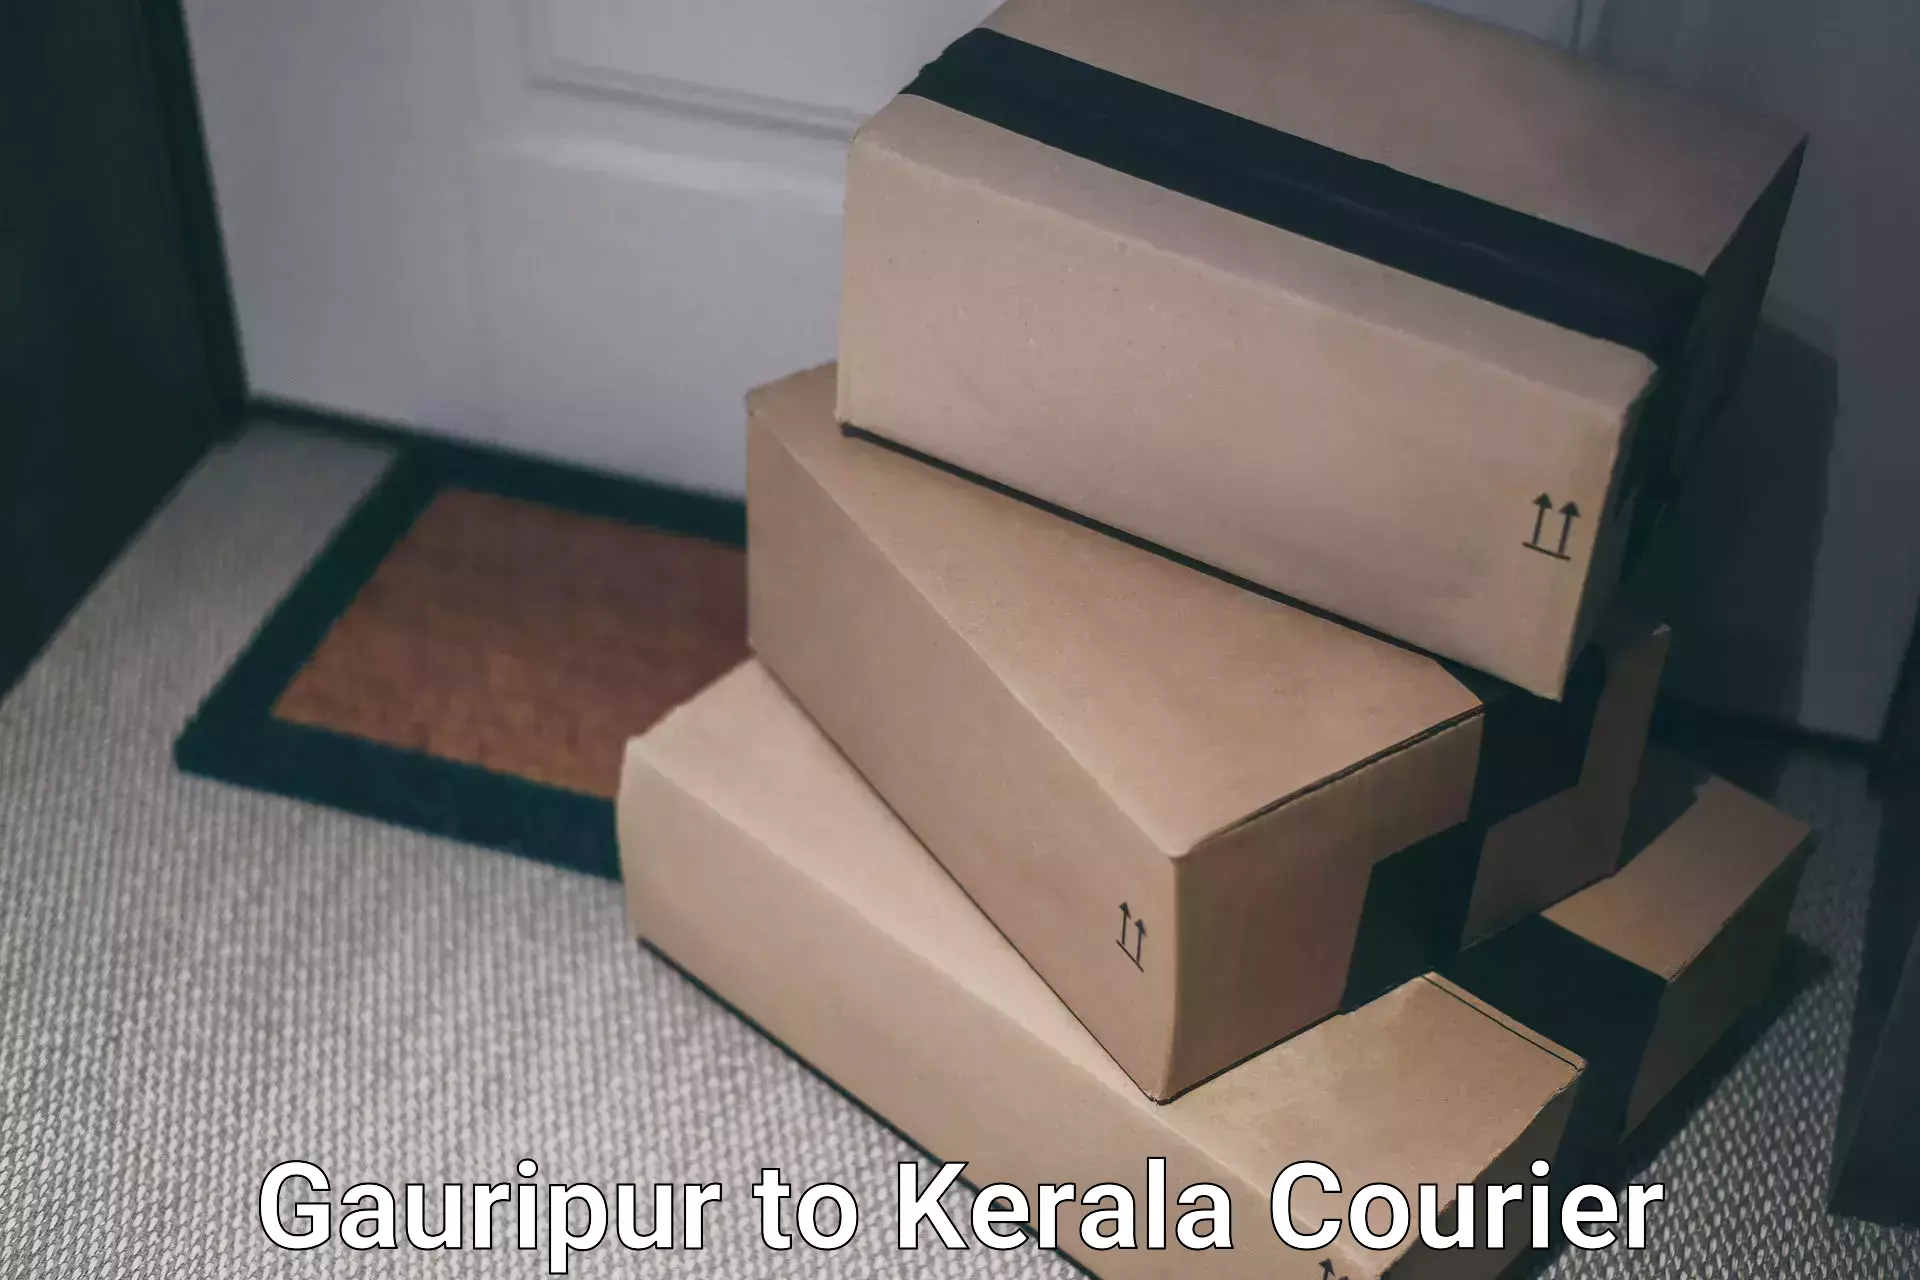 Global parcel delivery Gauripur to Koyilandy